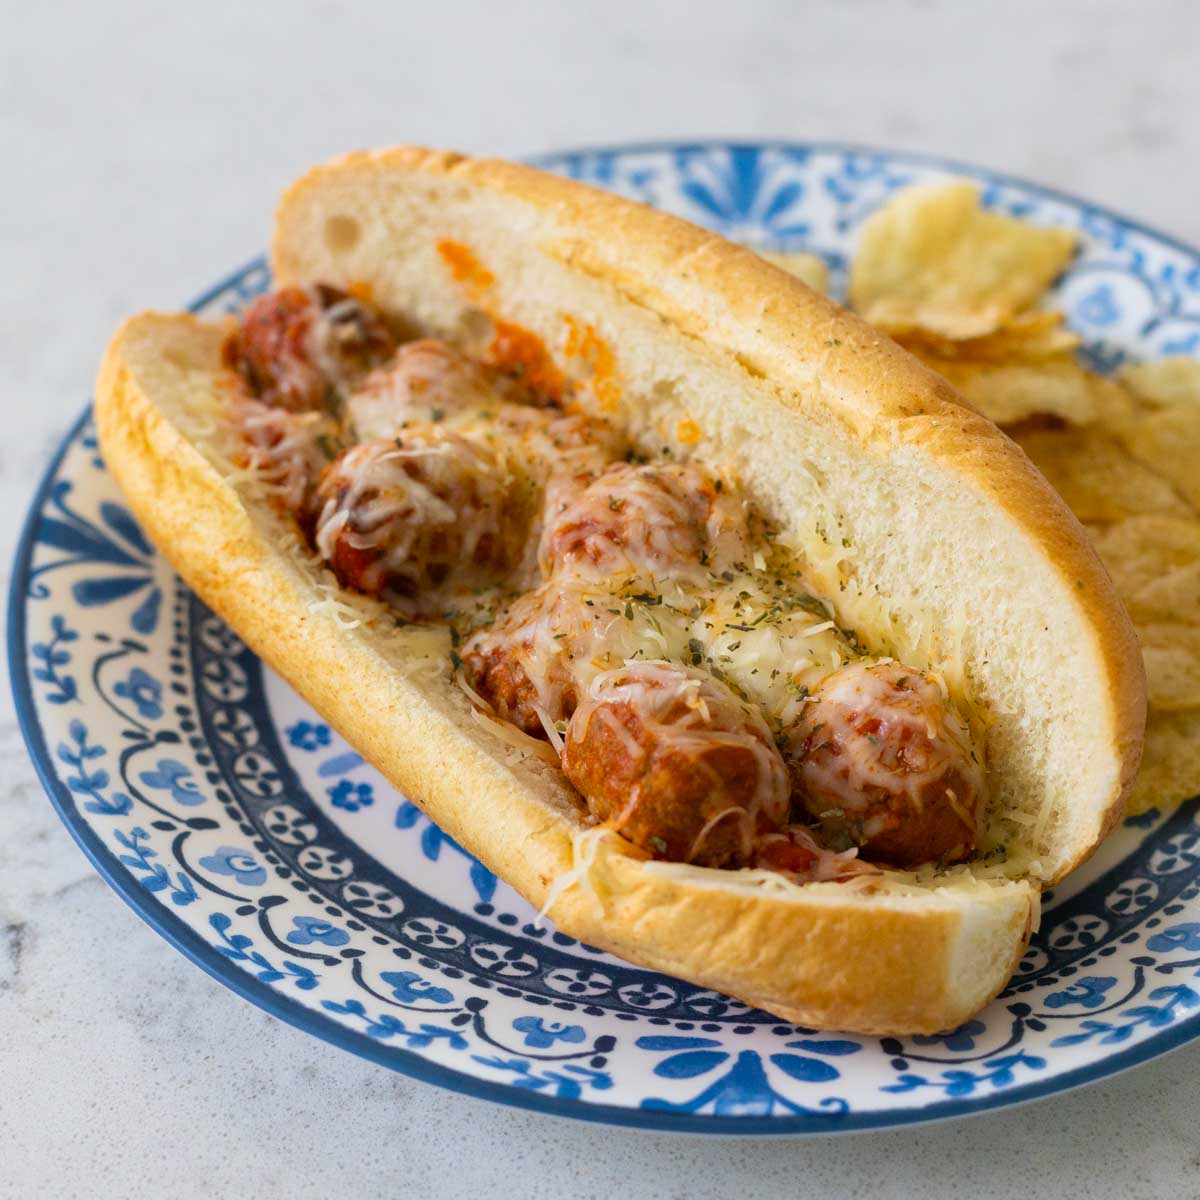 A blue plate has a long baked meatball sub with tomato sauce and melted cheese.